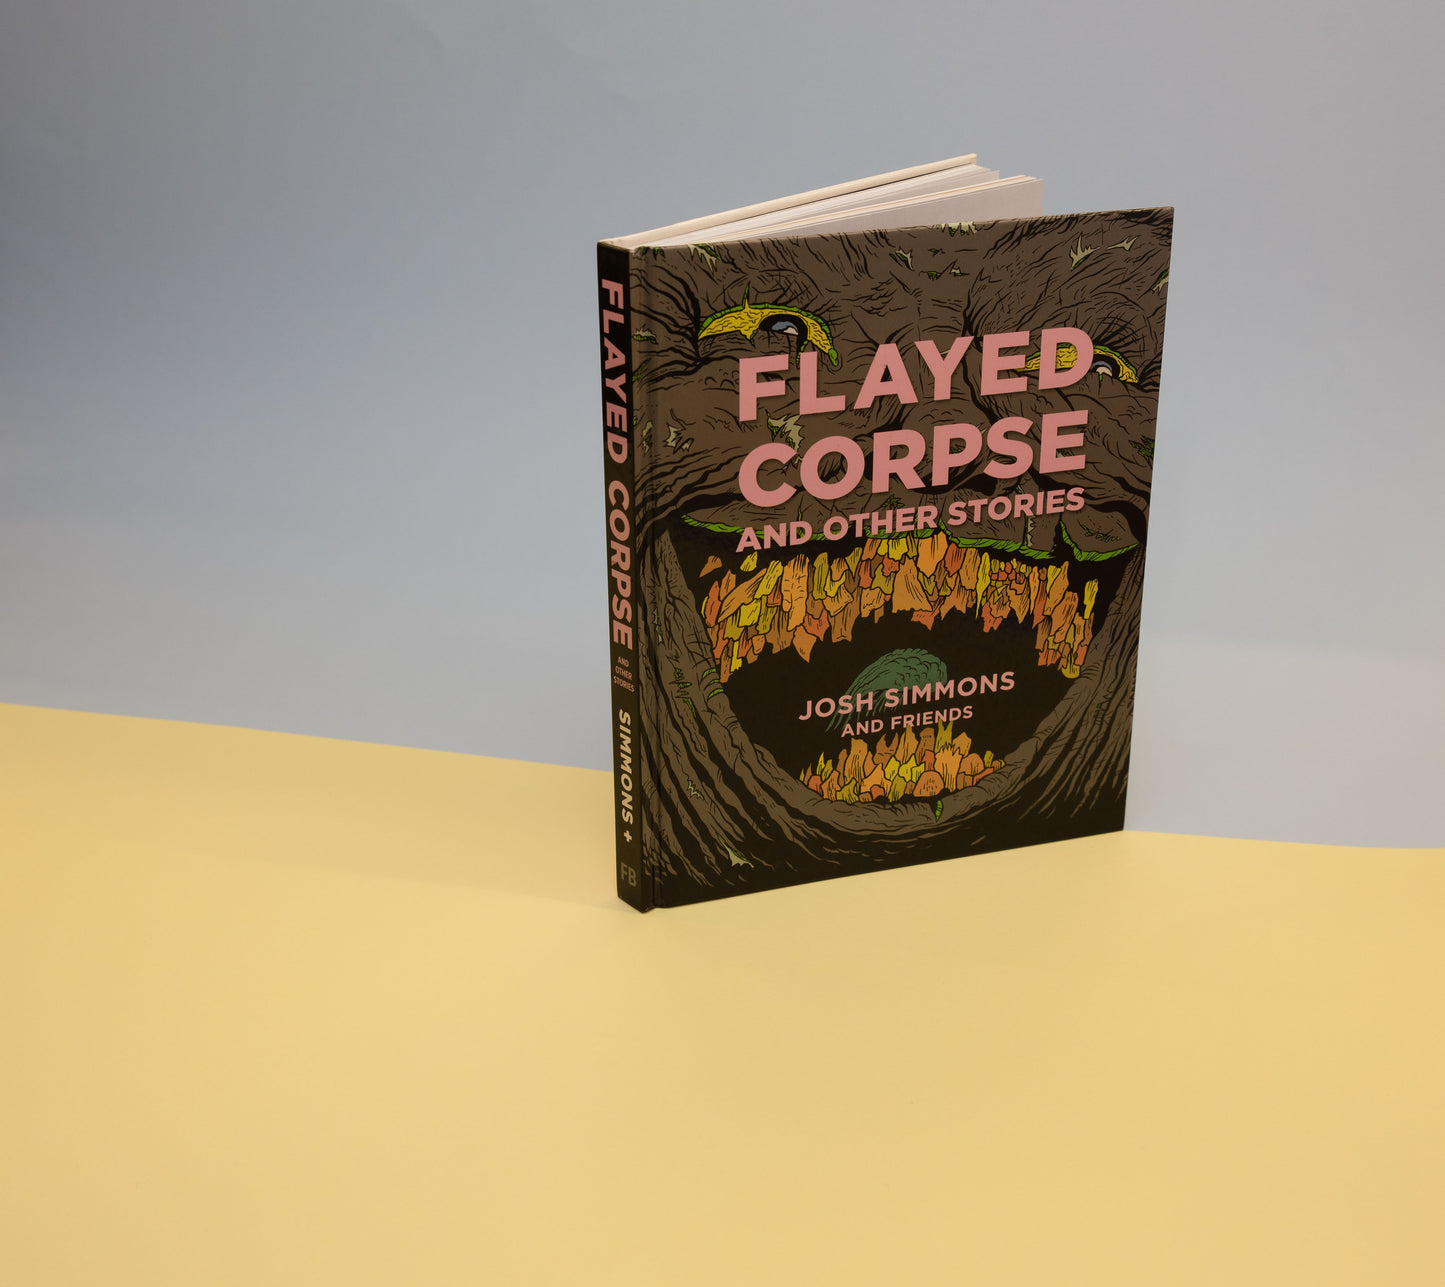 Flayed Corpse And Other Stories - by Josh Simmons and Friends